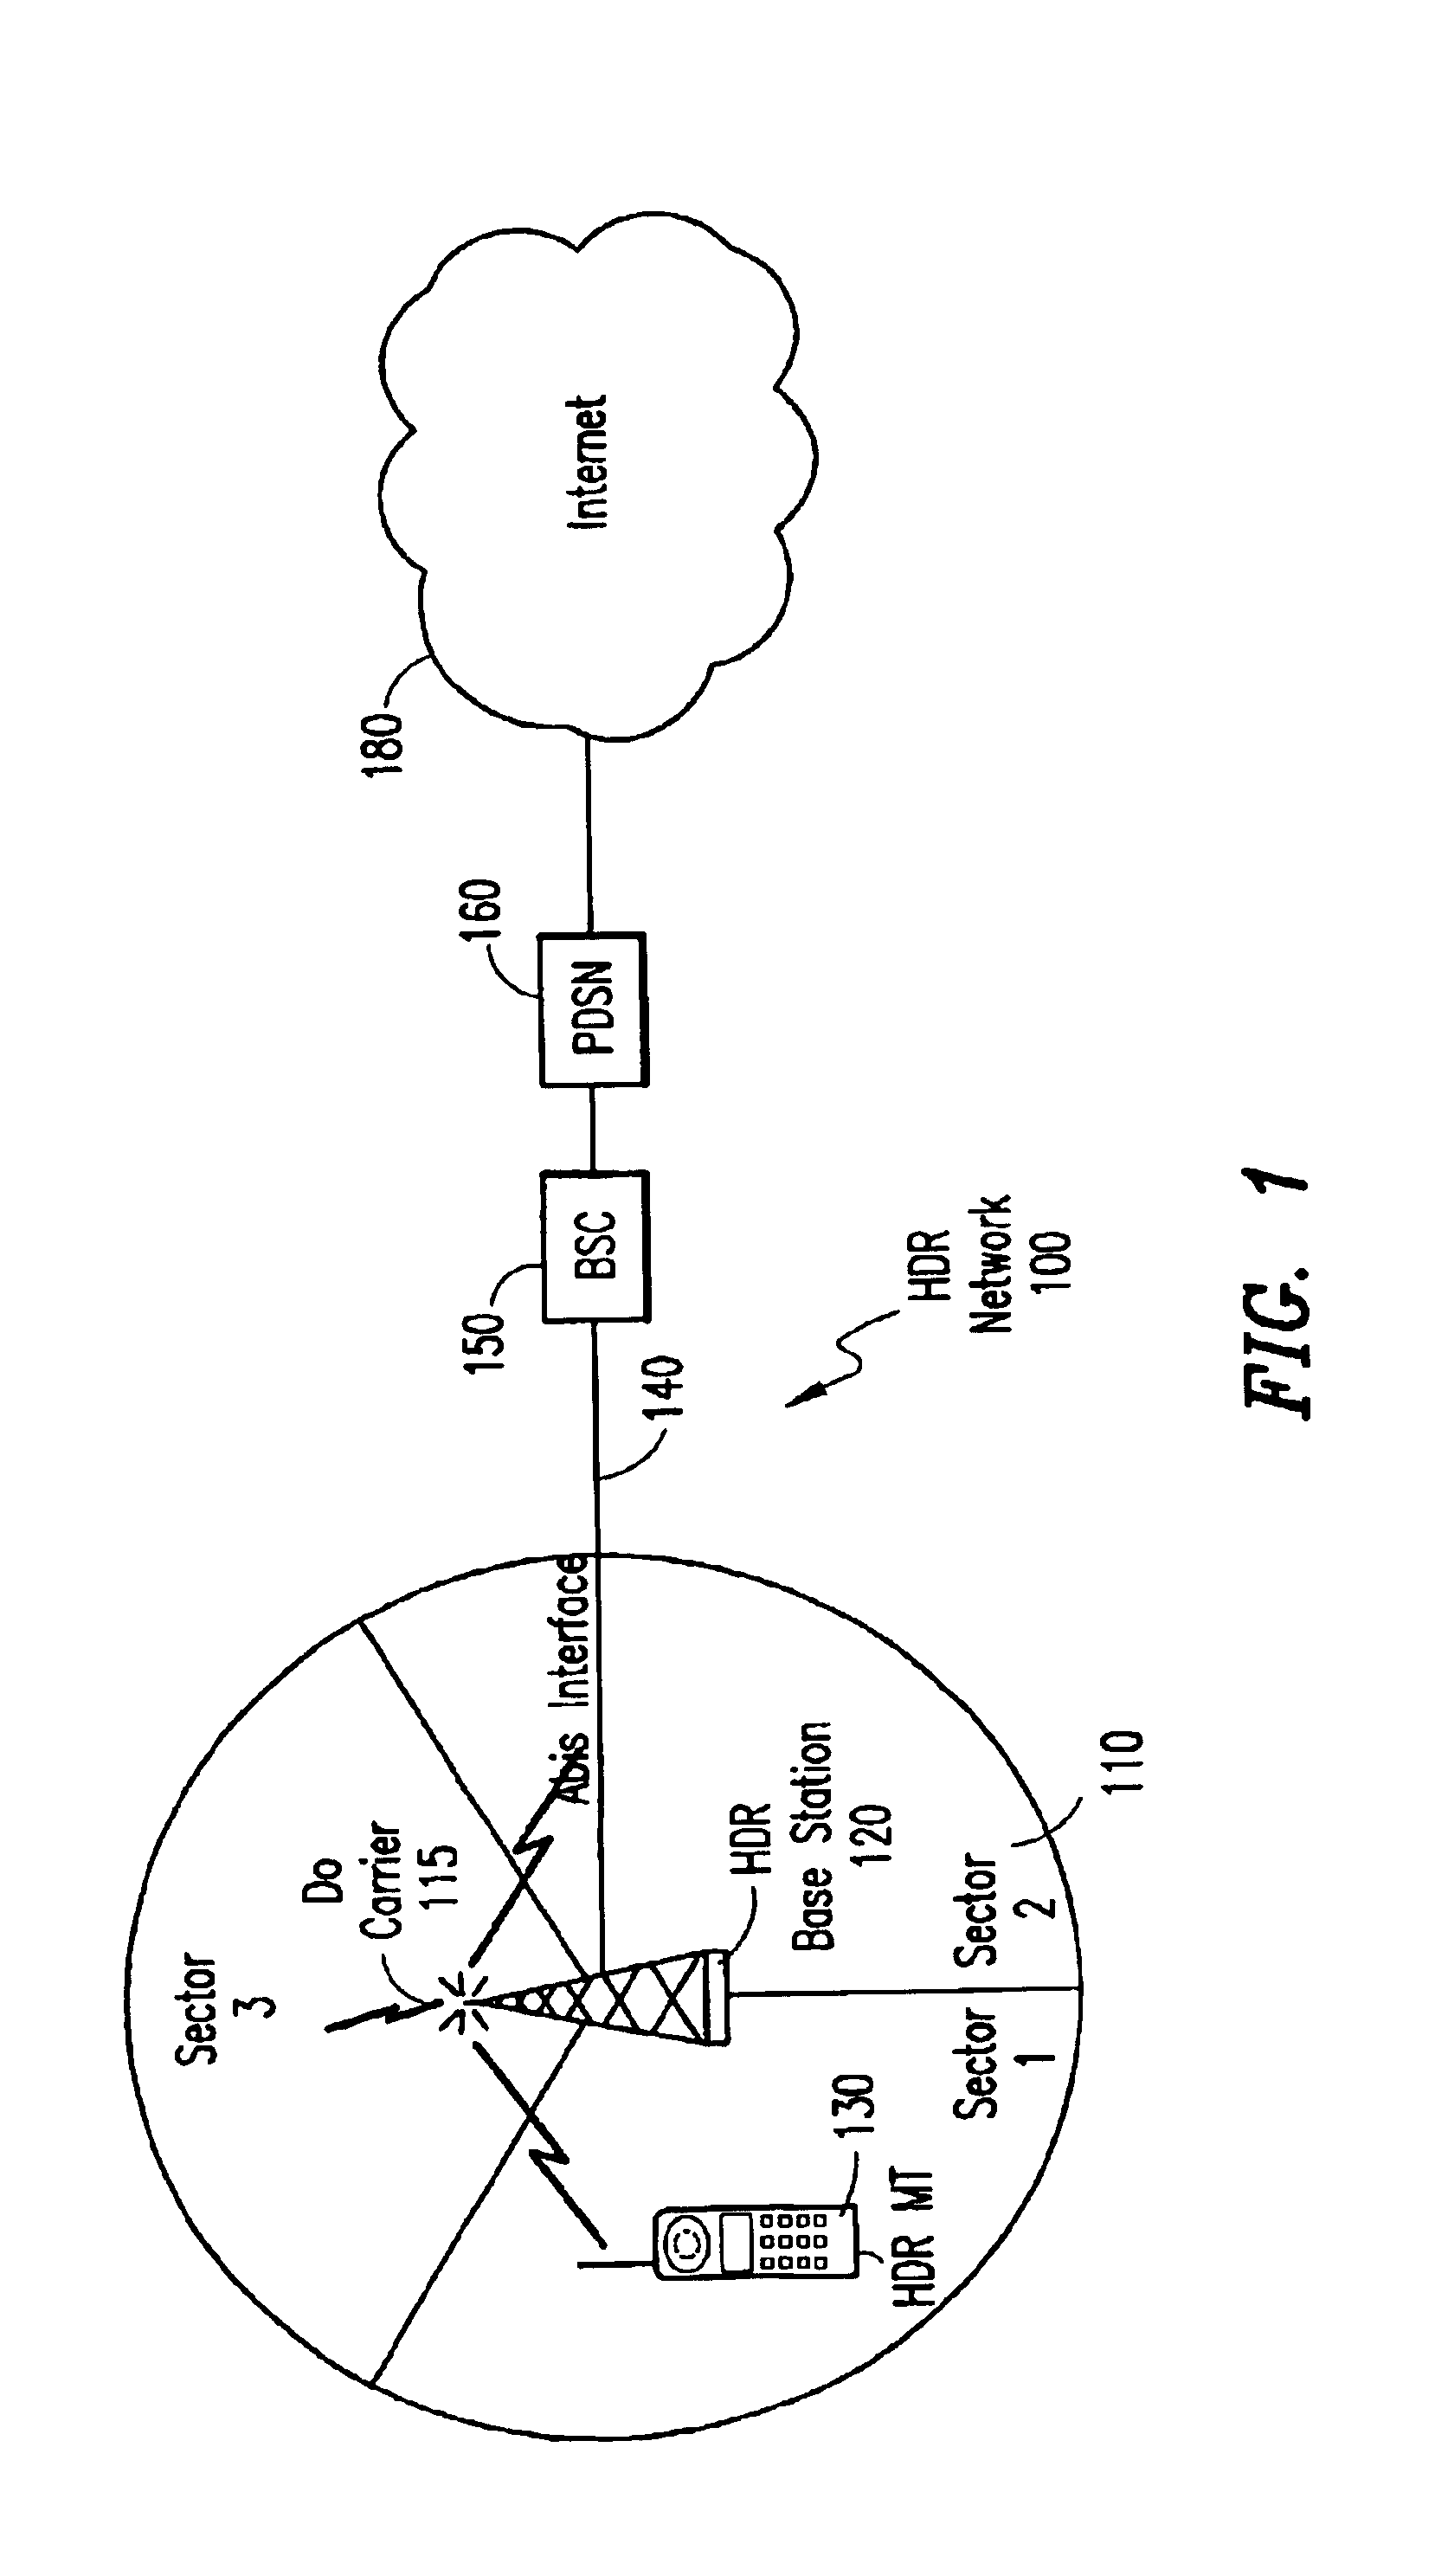 System and method for a virtual soft handover in a high data rate network based on data transmission information